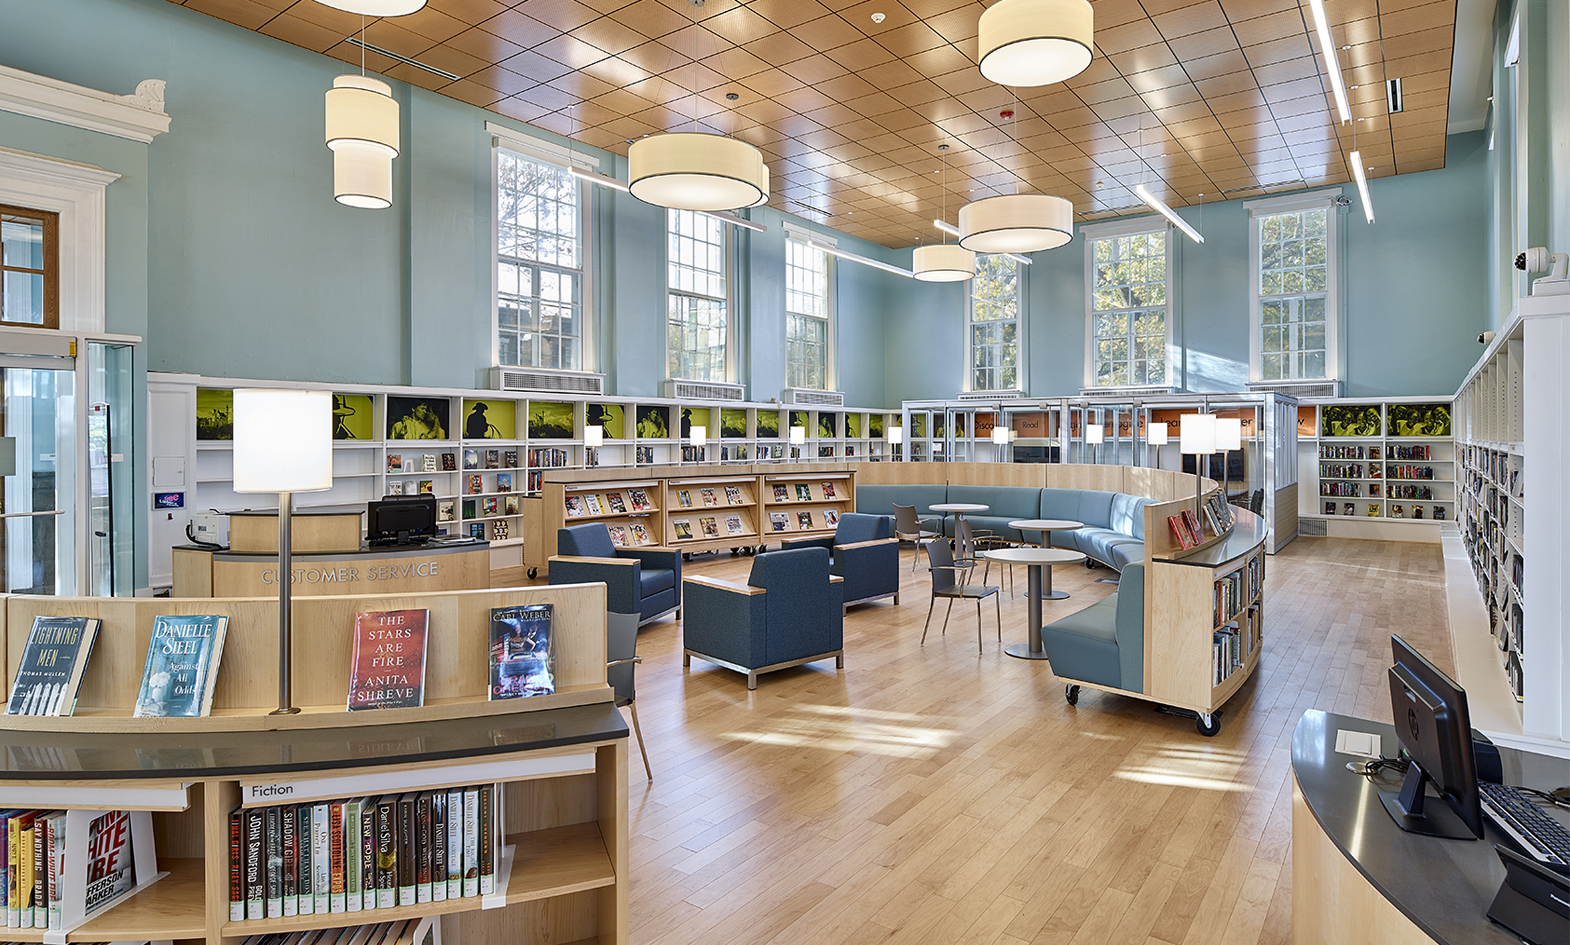 Library Furniture with curved library shelving and seating